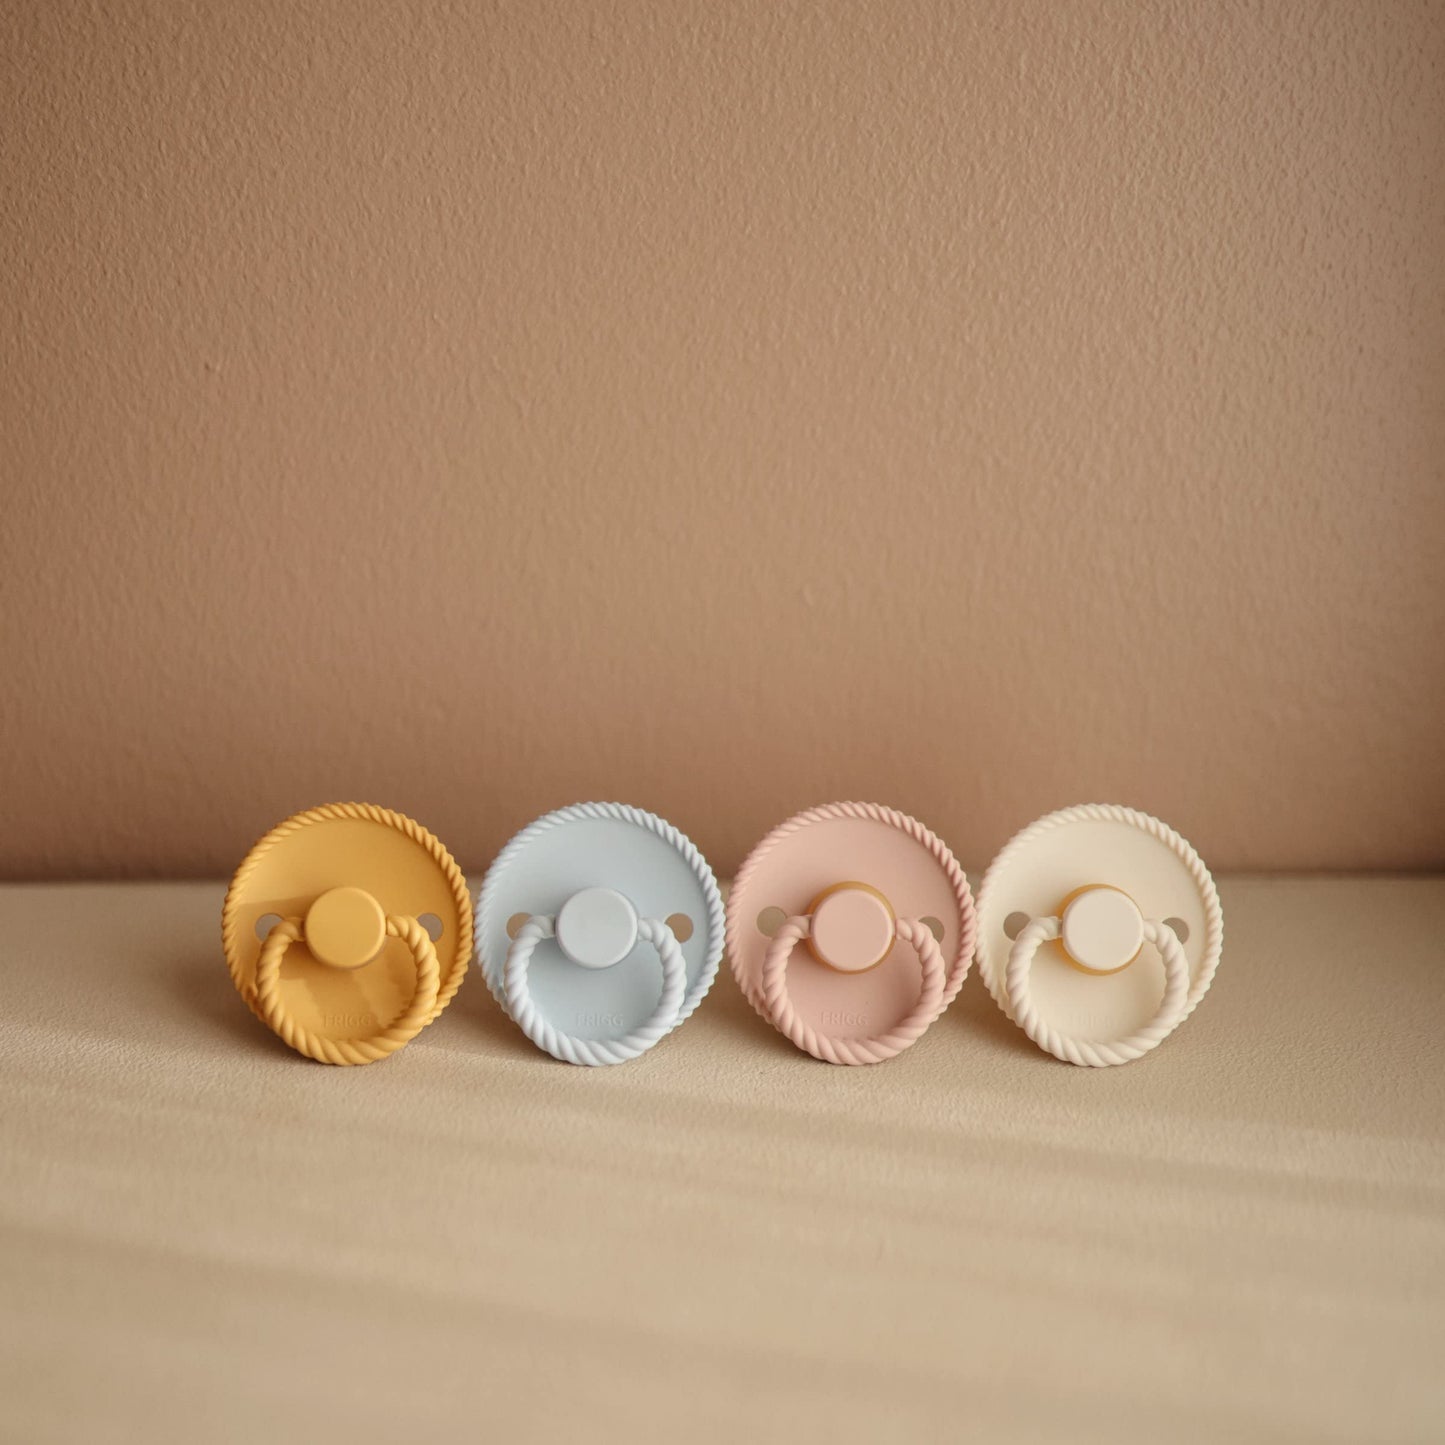 Frigg Rope Silicone Baby Pacifier 6M-18M, 2Pack, Blush/Cream - Size 2 - Laadlee